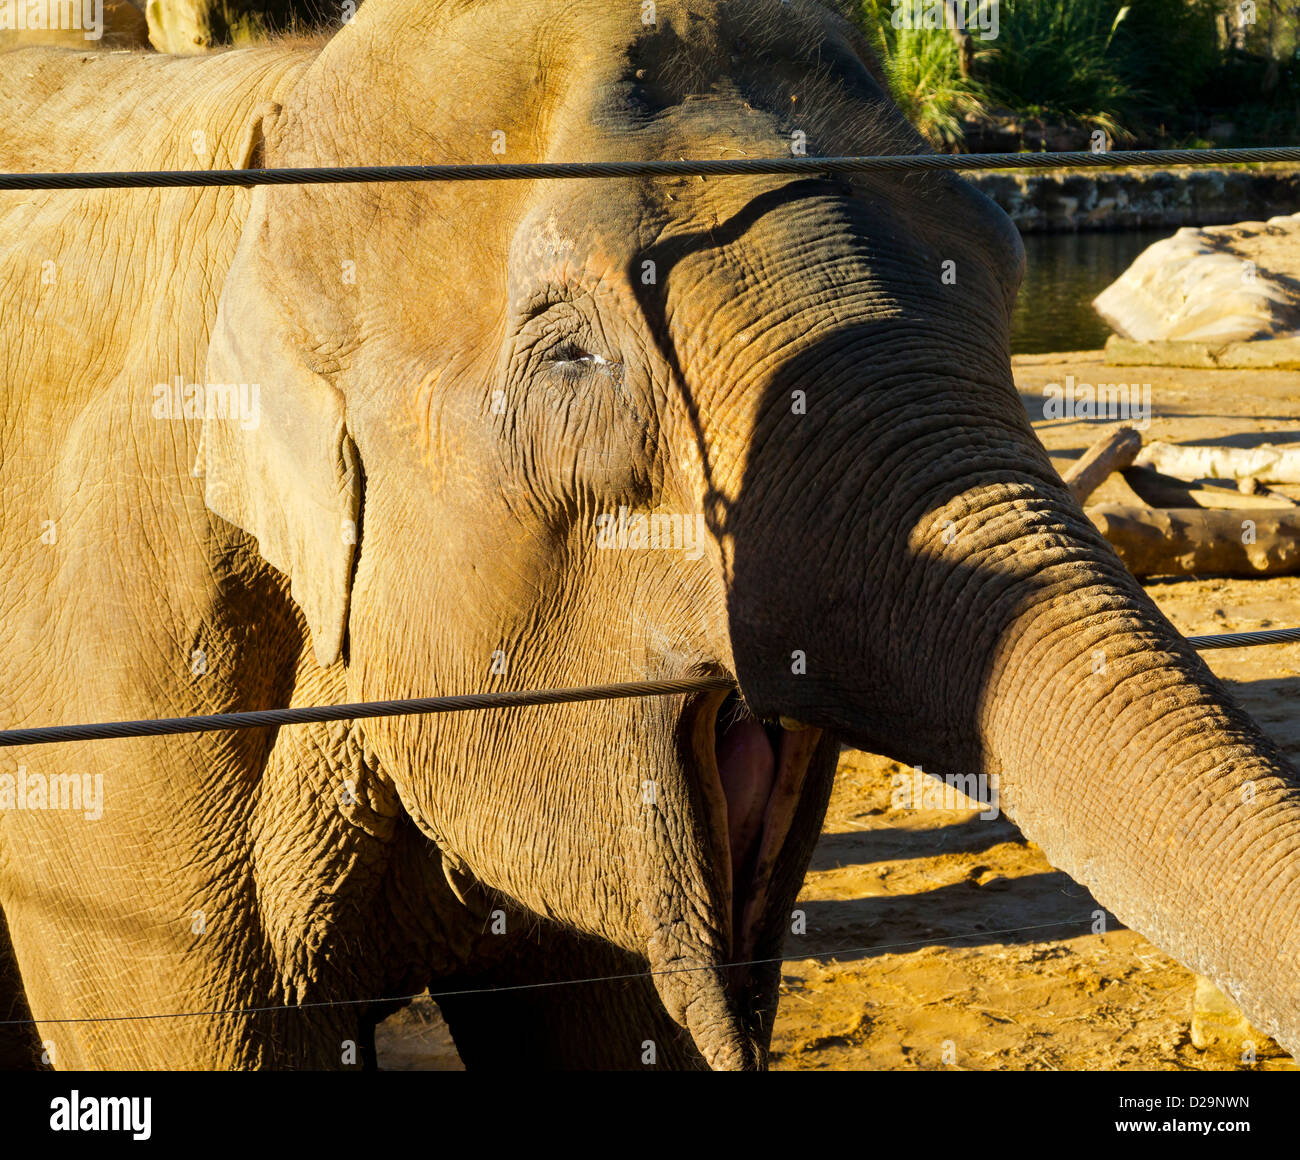 Asian or Asiatic elephant Elephas maximus in captivity at Twycross Zoo Leicestershire England UK Stock Photo